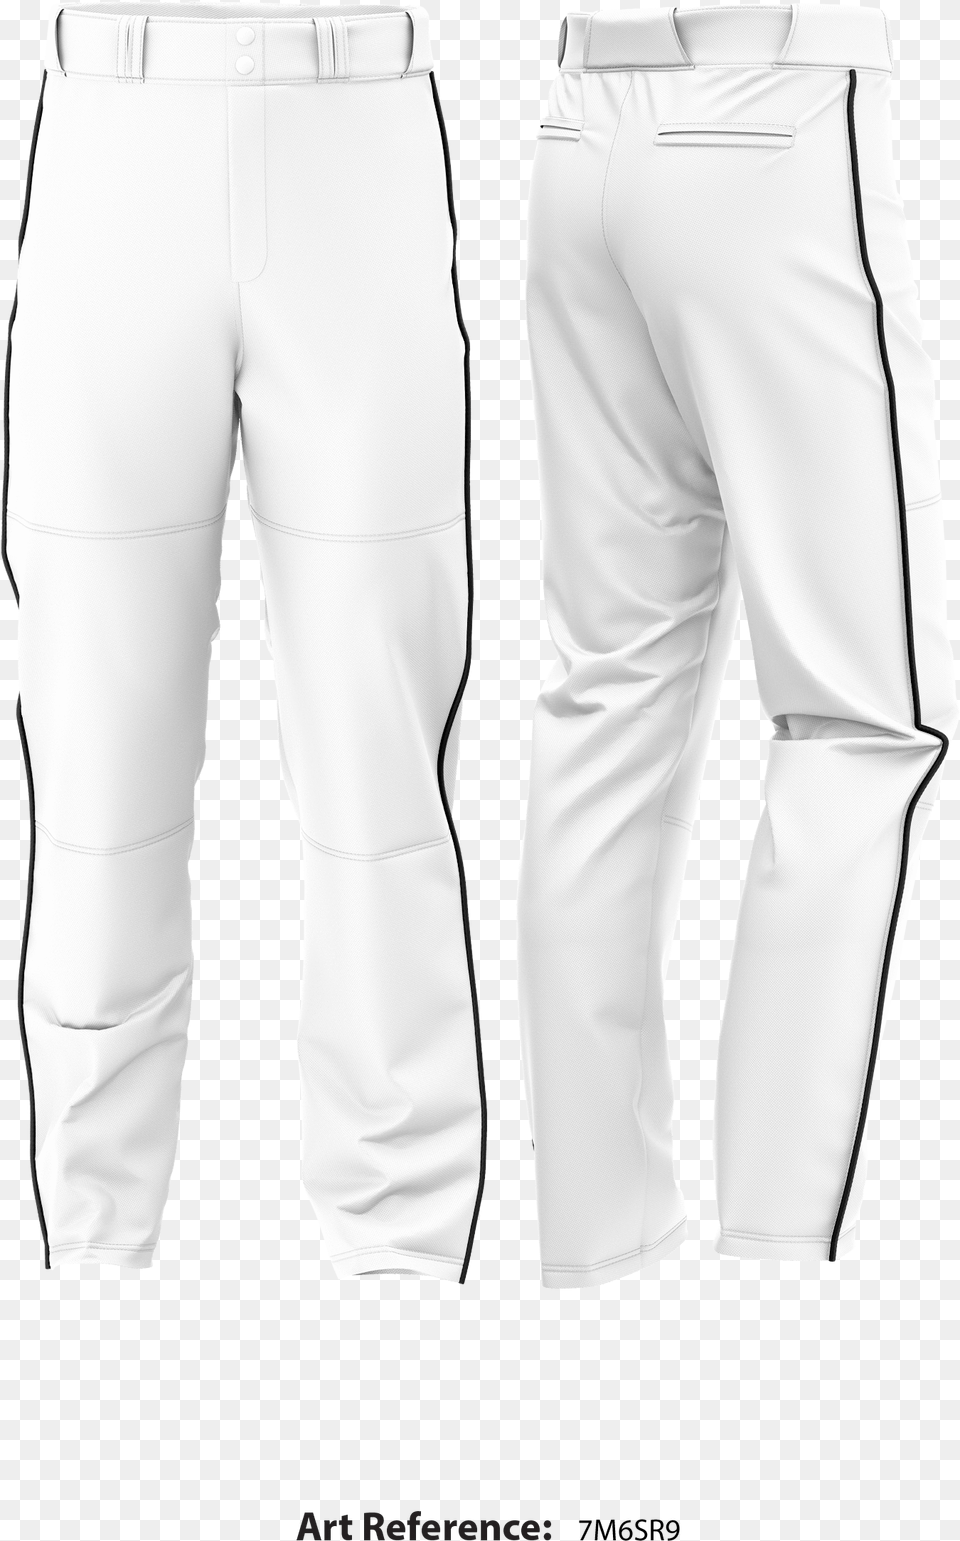 Redstone Baseball Pants, Clothing, Jeans Free Transparent Png